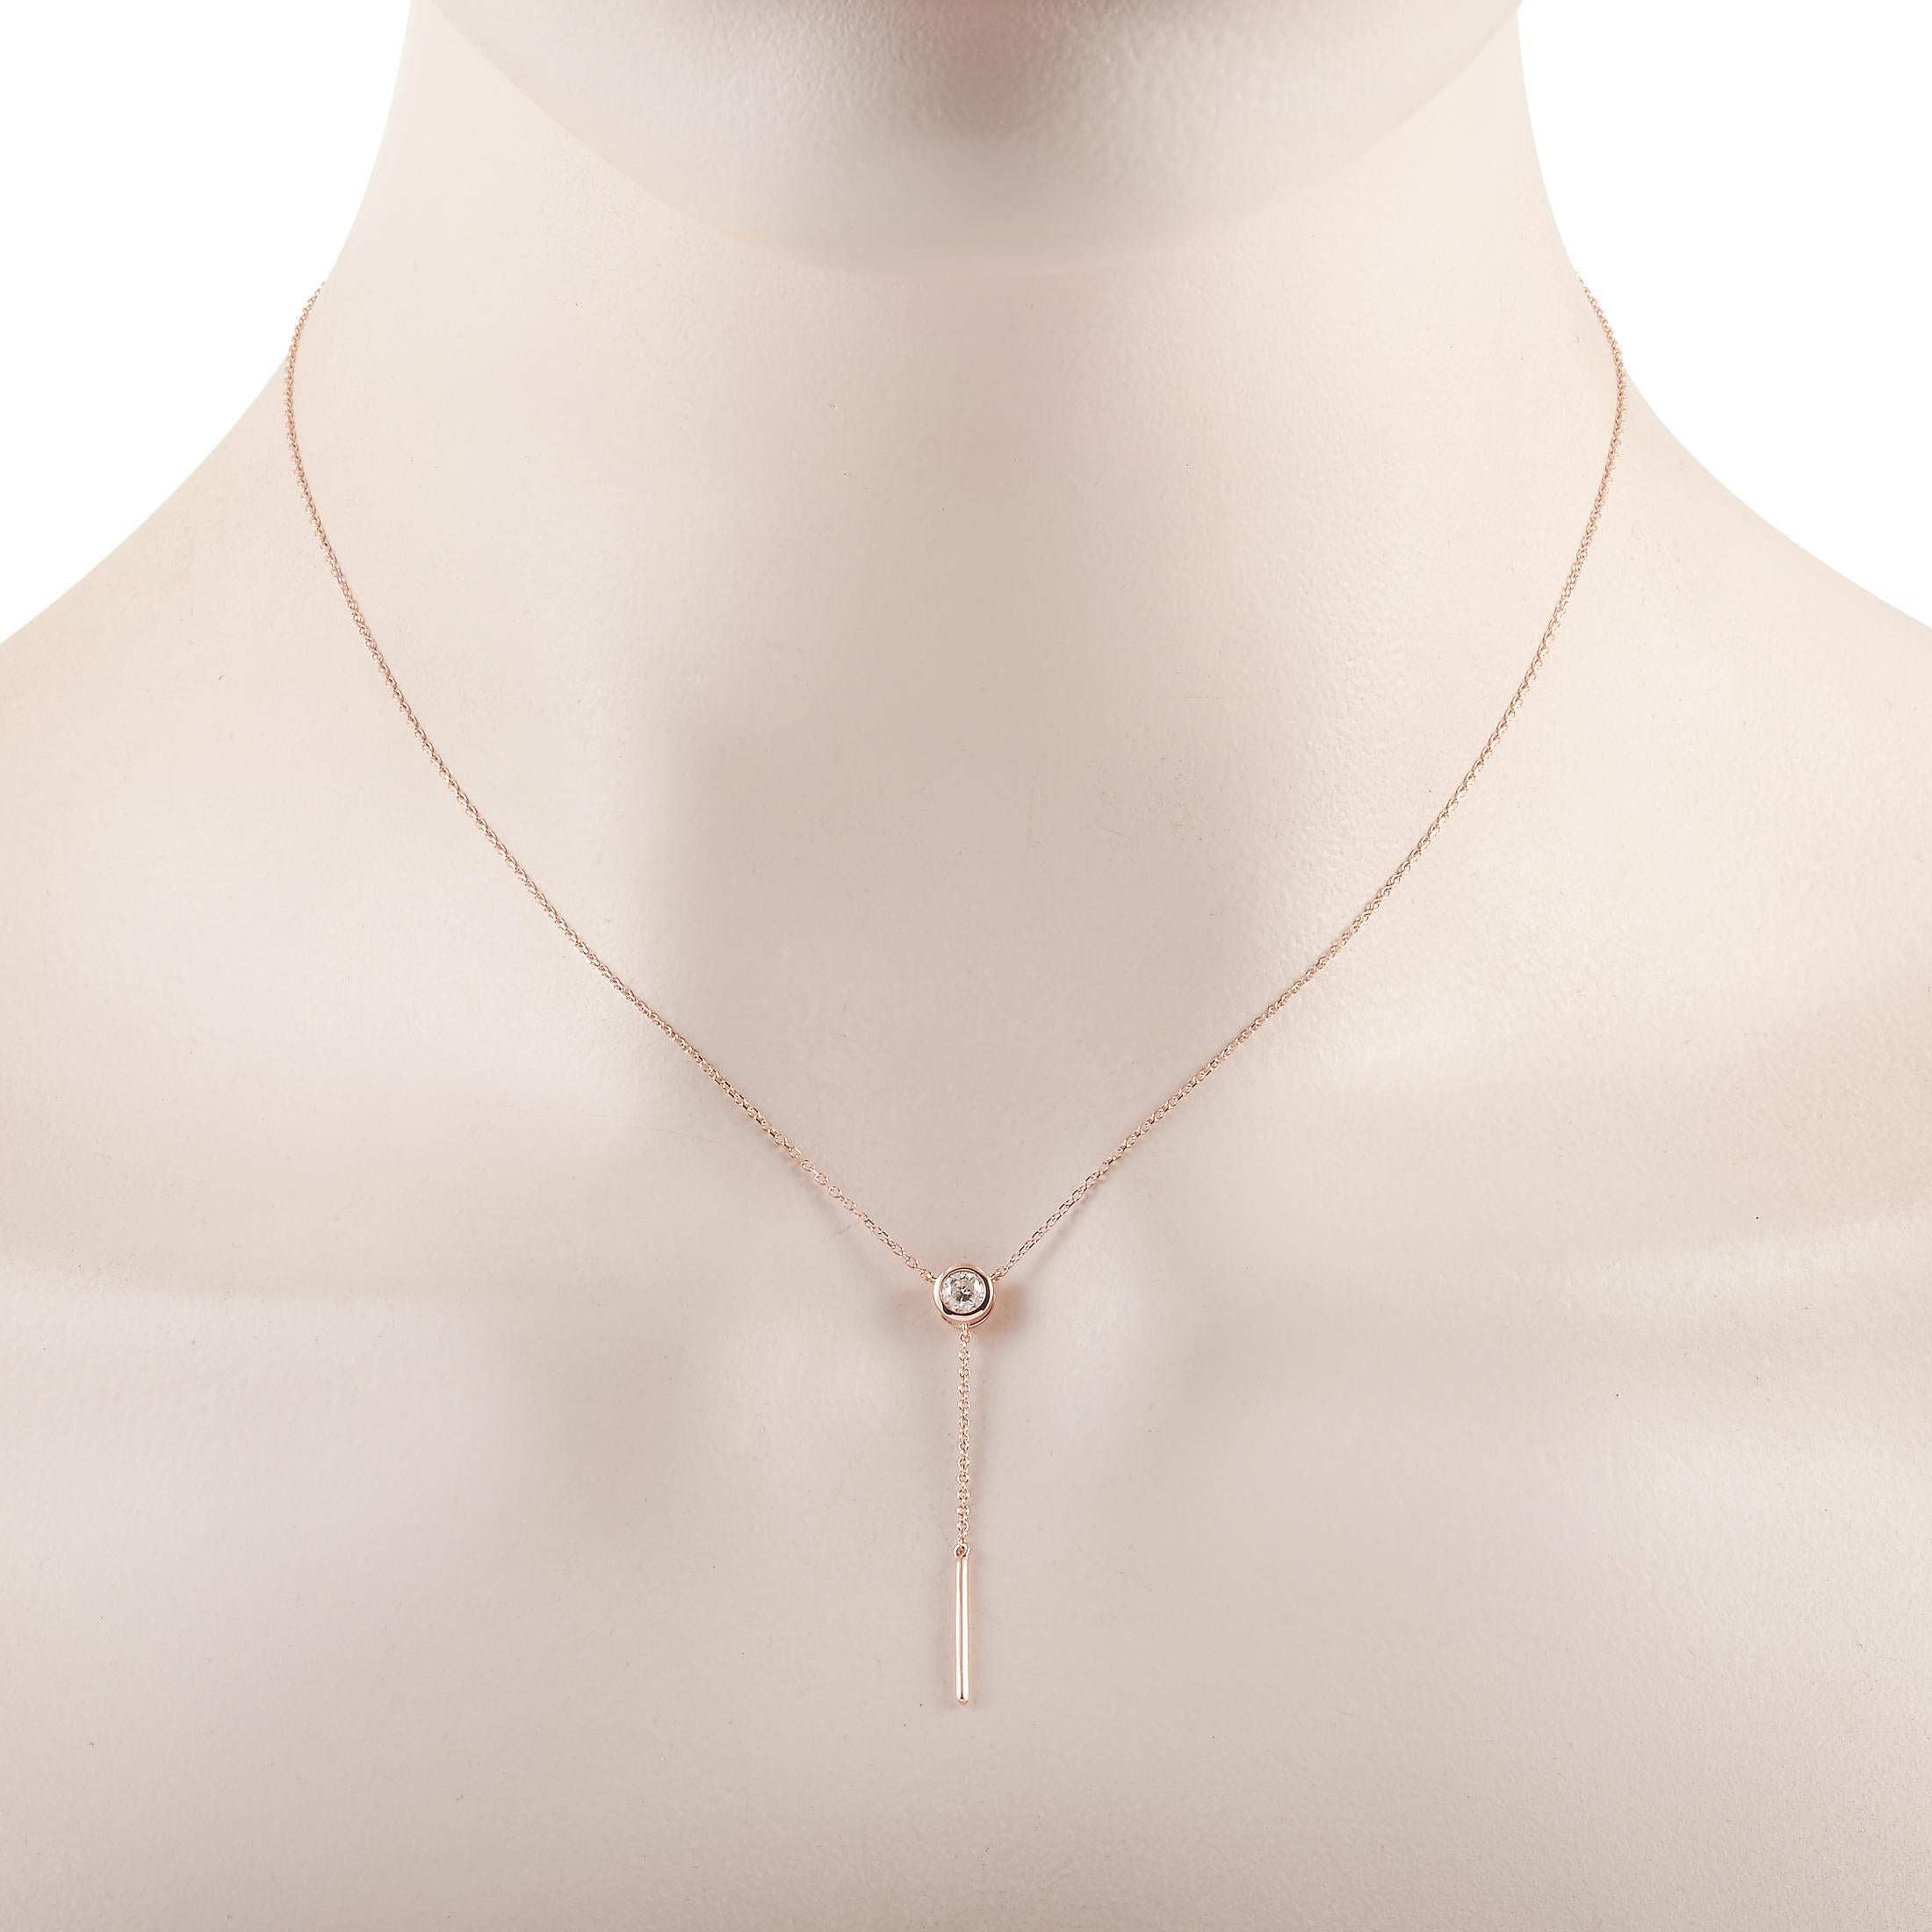 This LB Exclusive necklace is made of 14K rose gold and embellished with a 0.25 ct diamond stone. The necklace weighs 1.7 grams and boasts a 15” chain and a pendant that measures 1.50” in length and 0.13” in width.
 
 Offered in brand new condition,